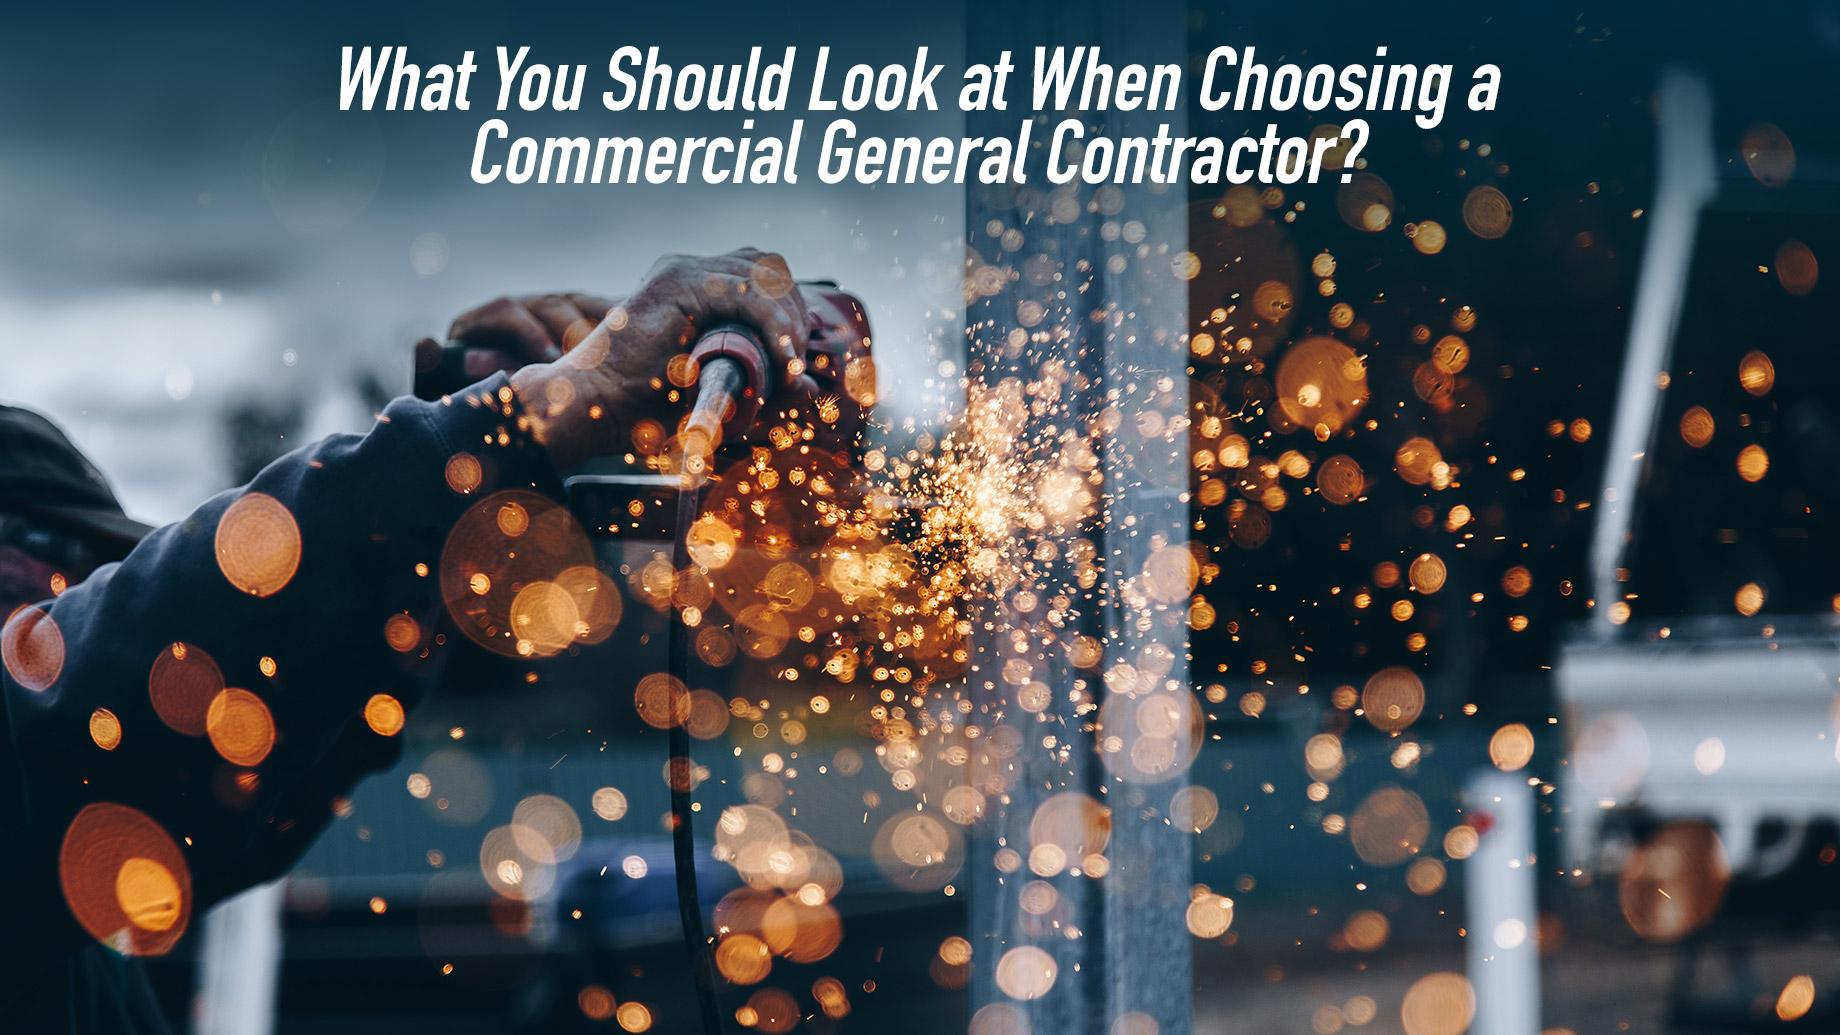 What You Should Look at When Choosing a Commercial General Contractor?